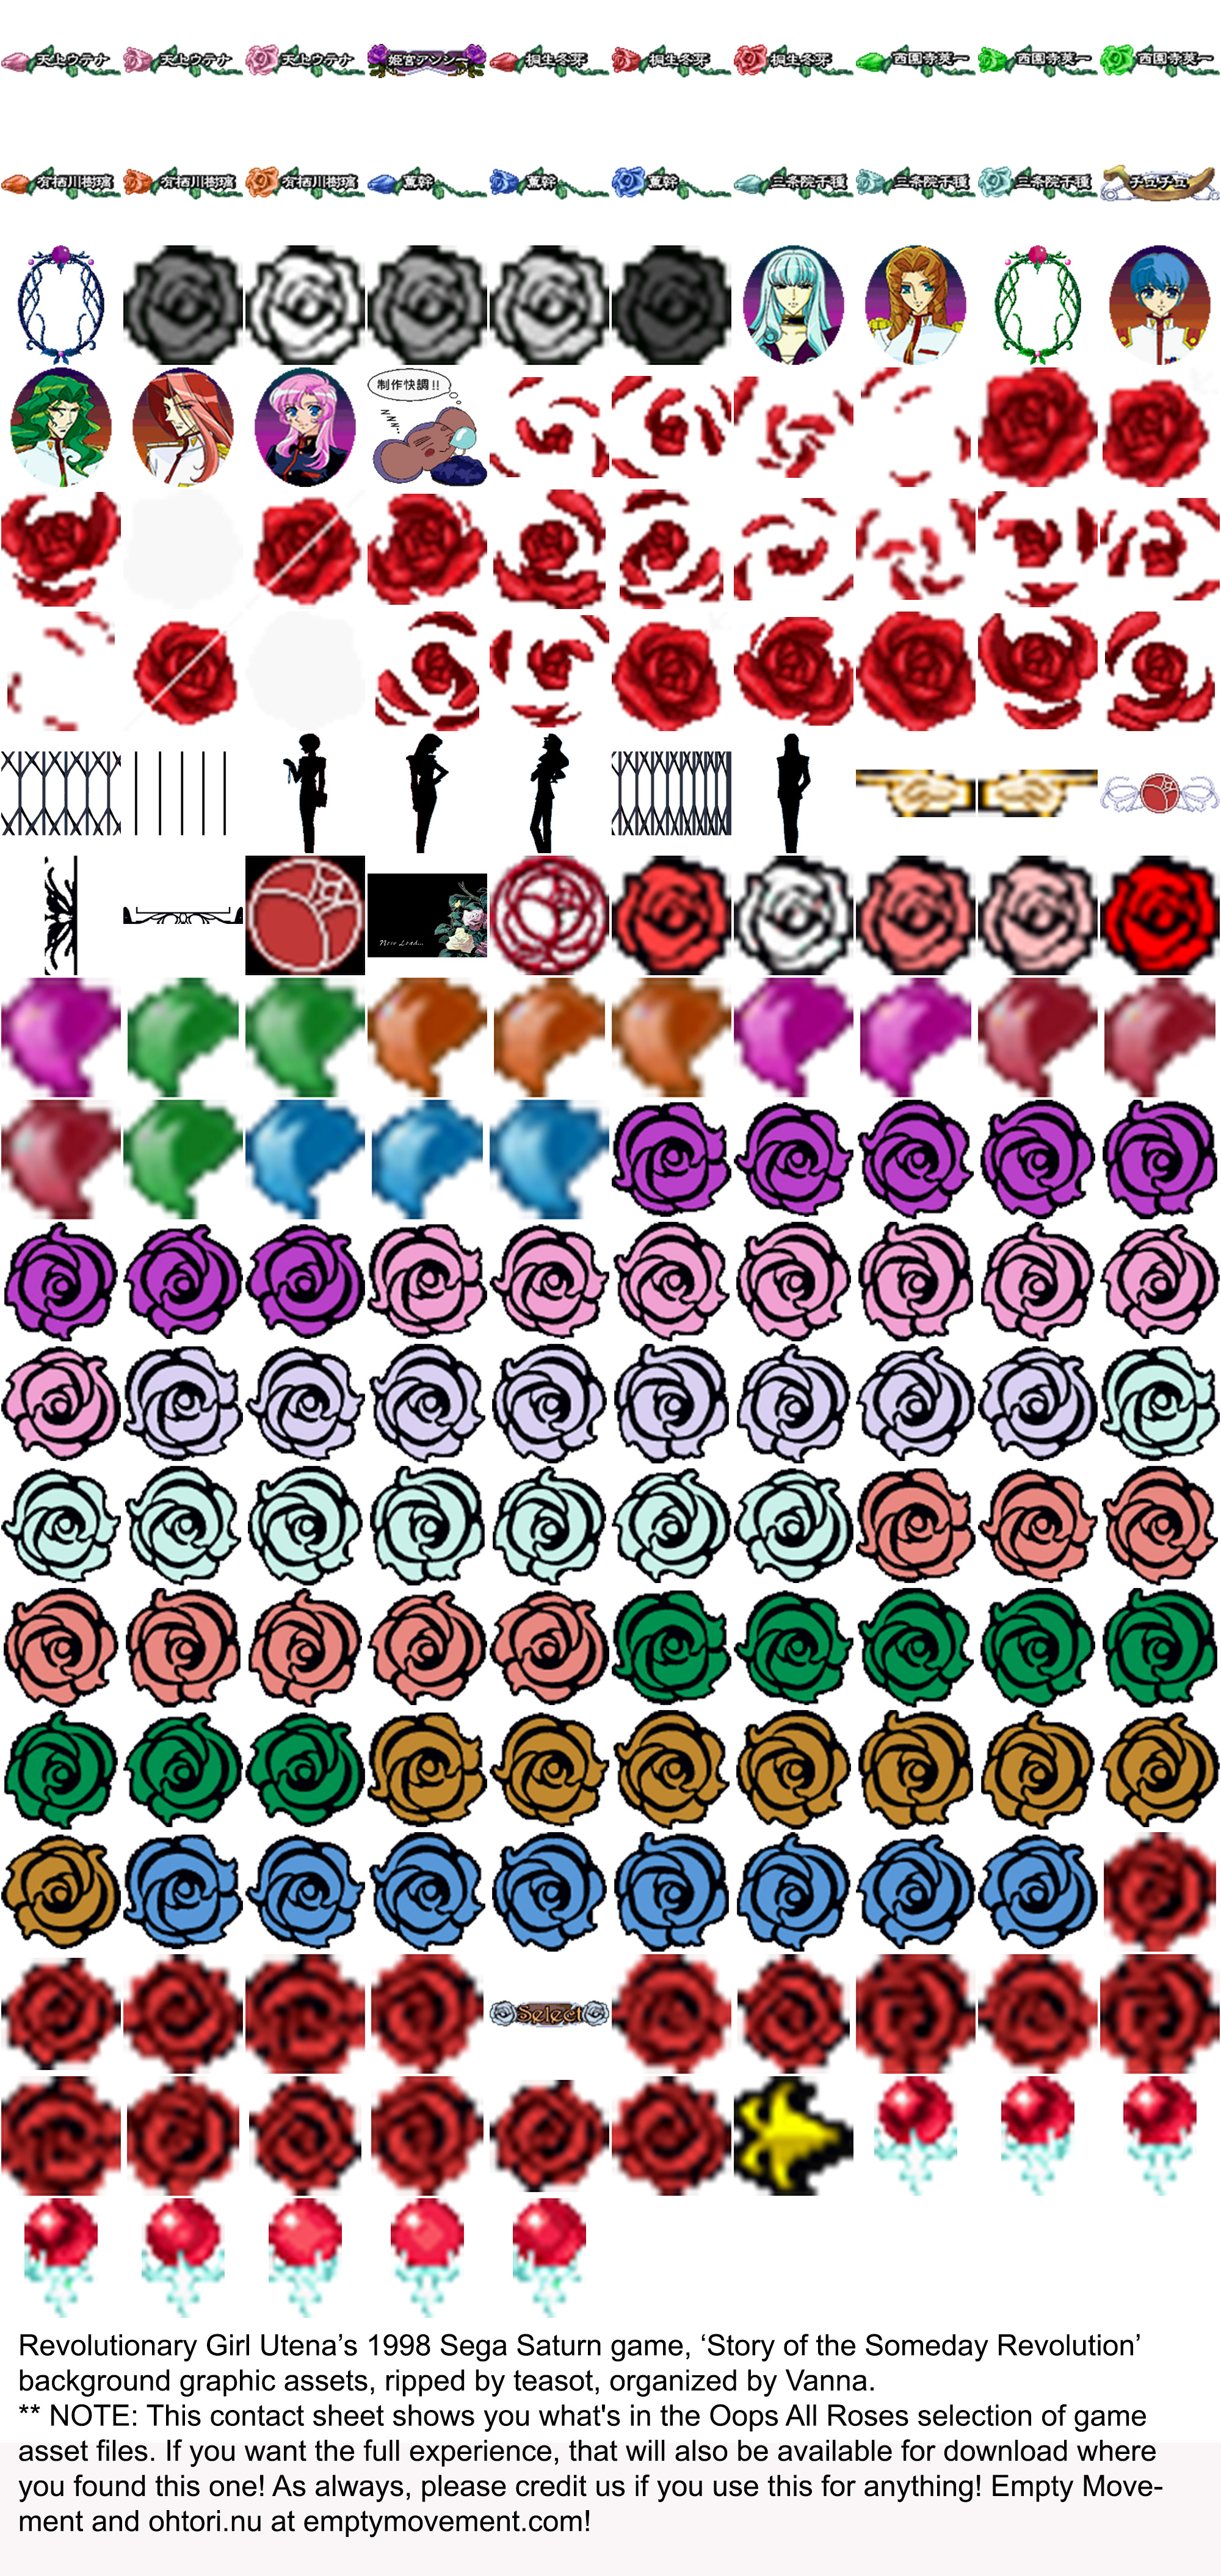 SG-RM_Contact_Sheet_-_Oops_All_Roses.jpg